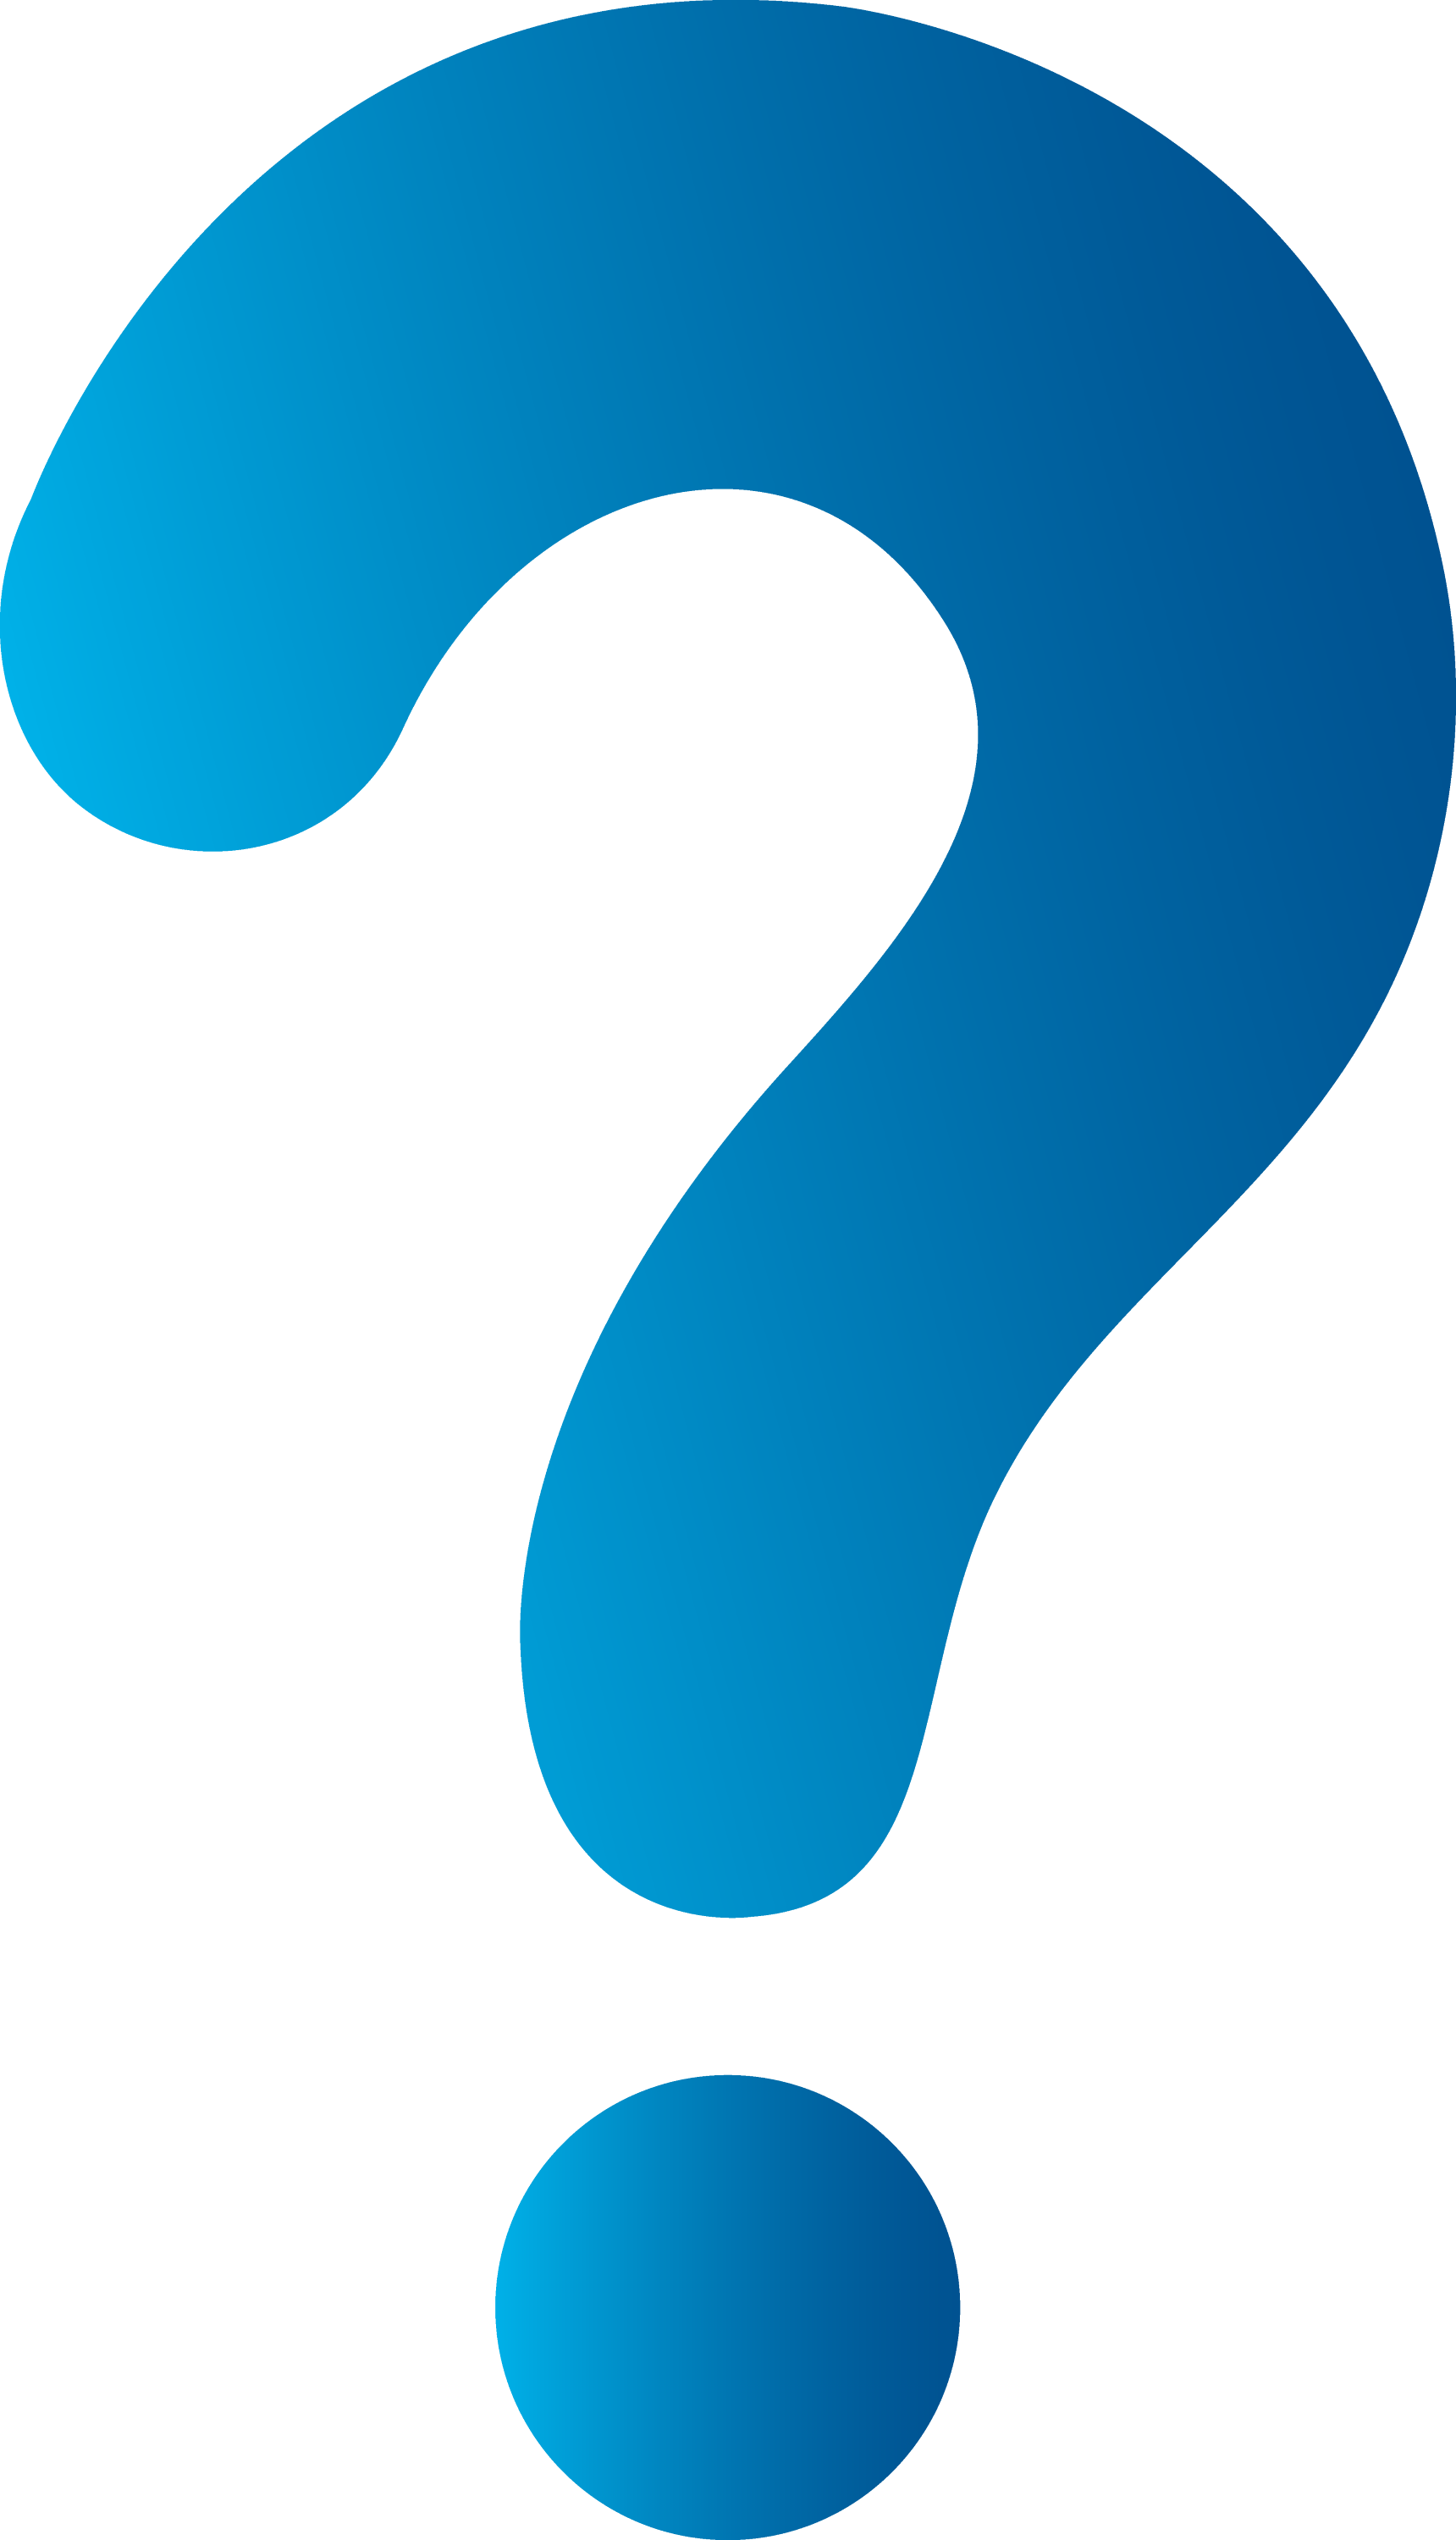 question mark images free clip art - photo #4